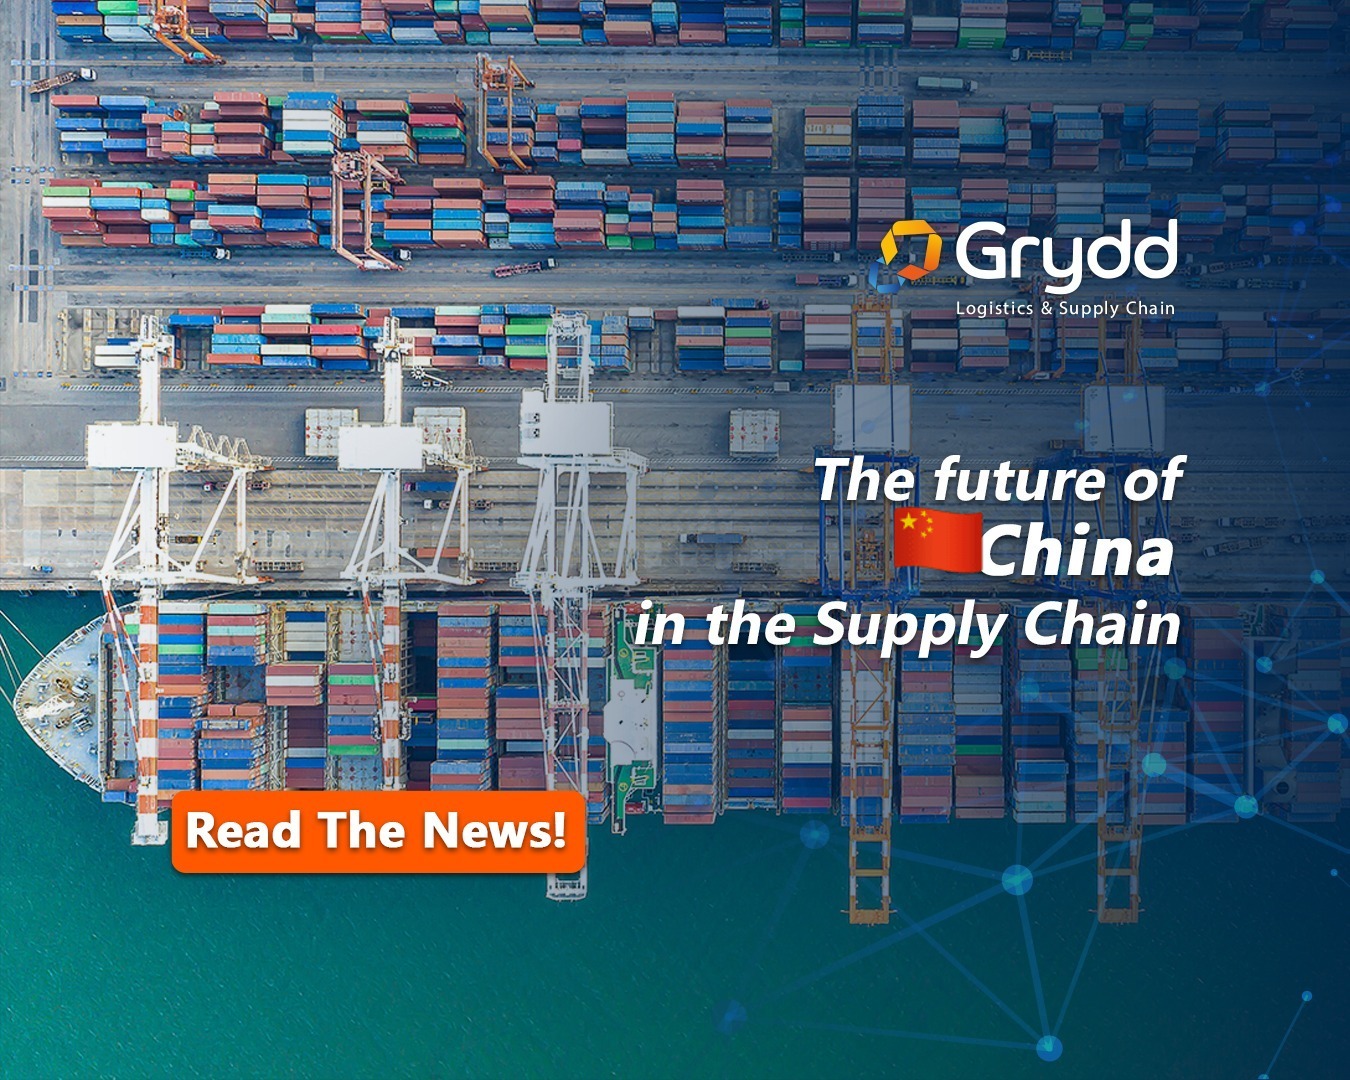 The future of China in the Supply Chain